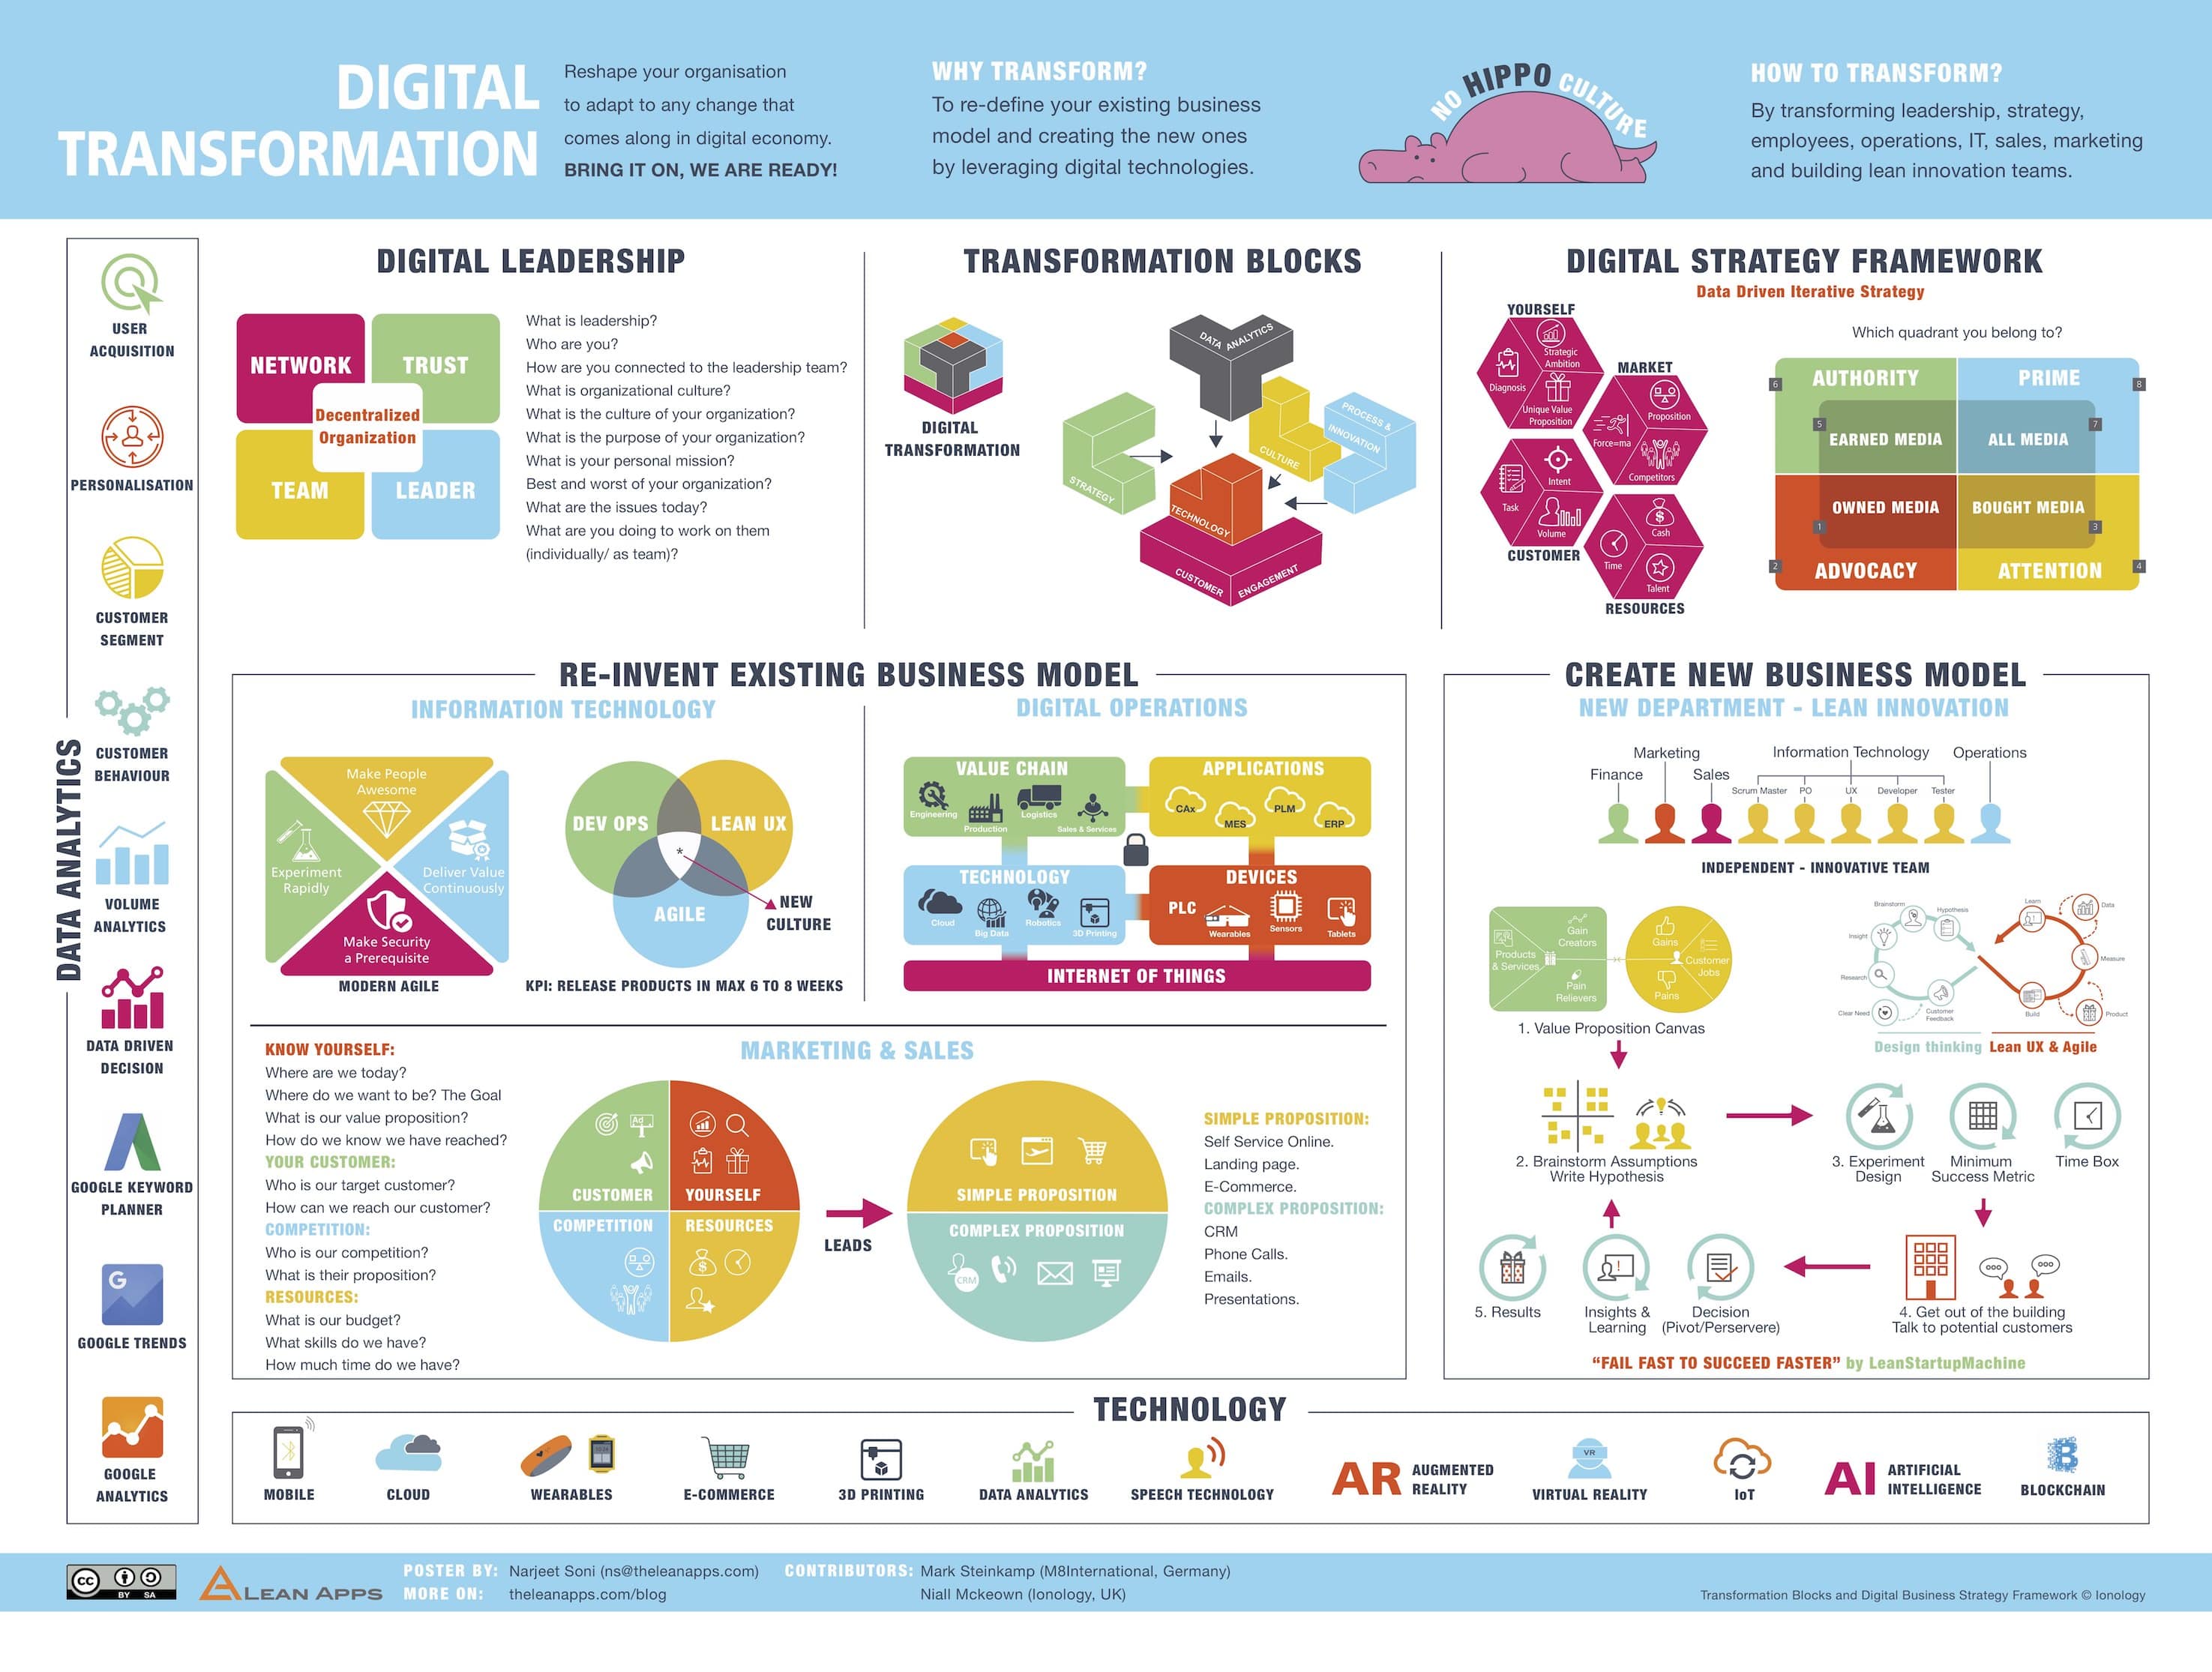 Innovation for Digital Transformation and Policy Analytics - The